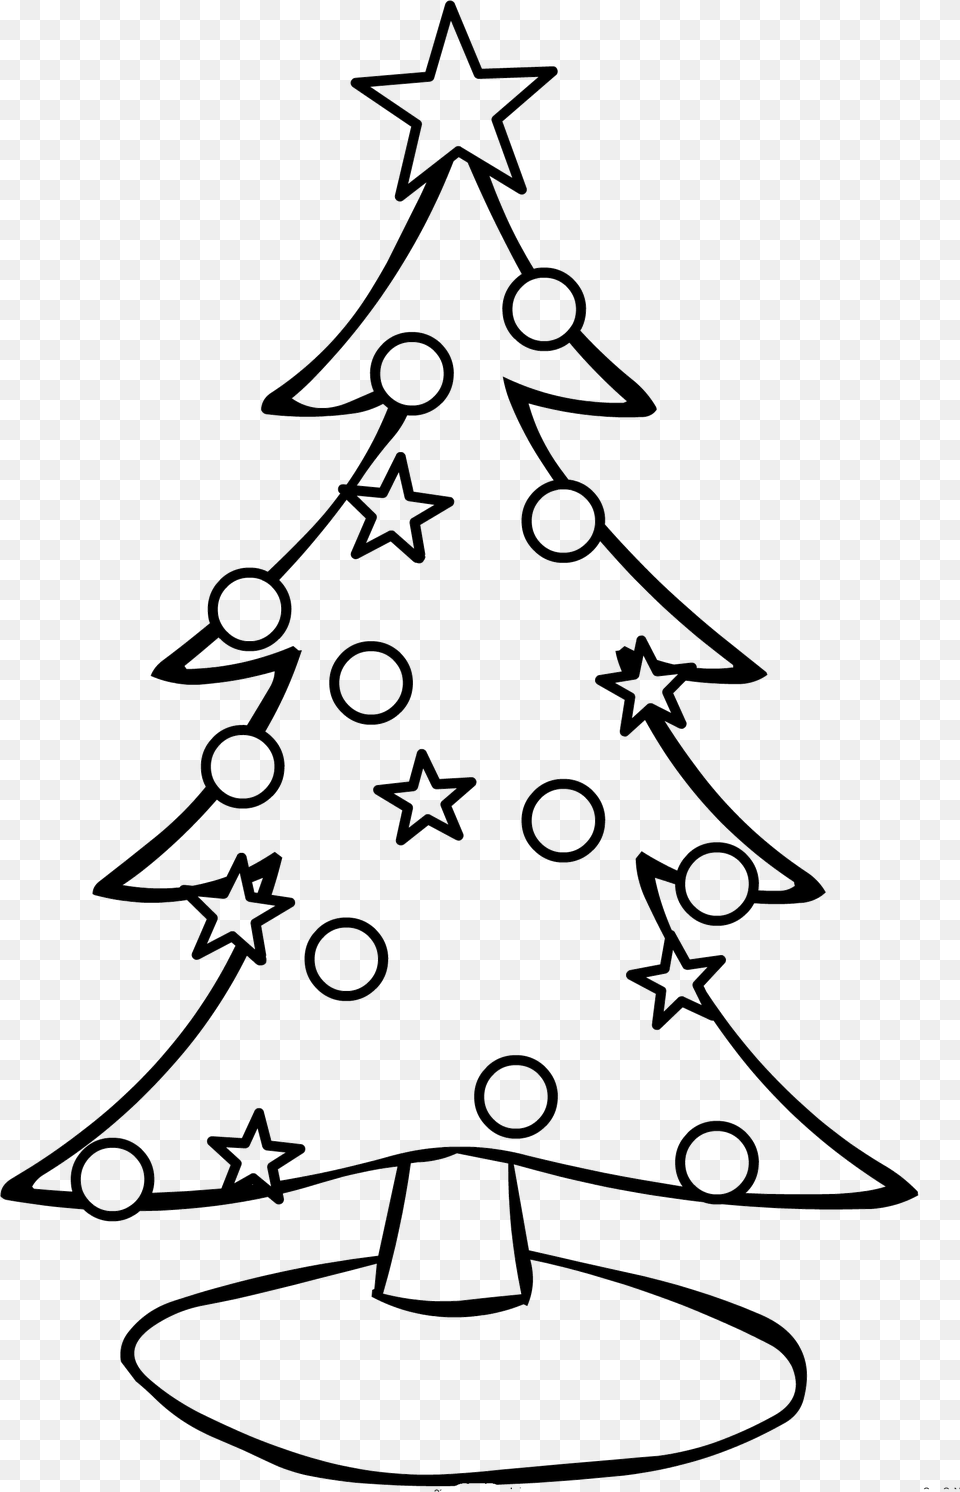 Christmas Tree For Colouring, Christmas Decorations, Festival, Christmas Tree, Disk Png